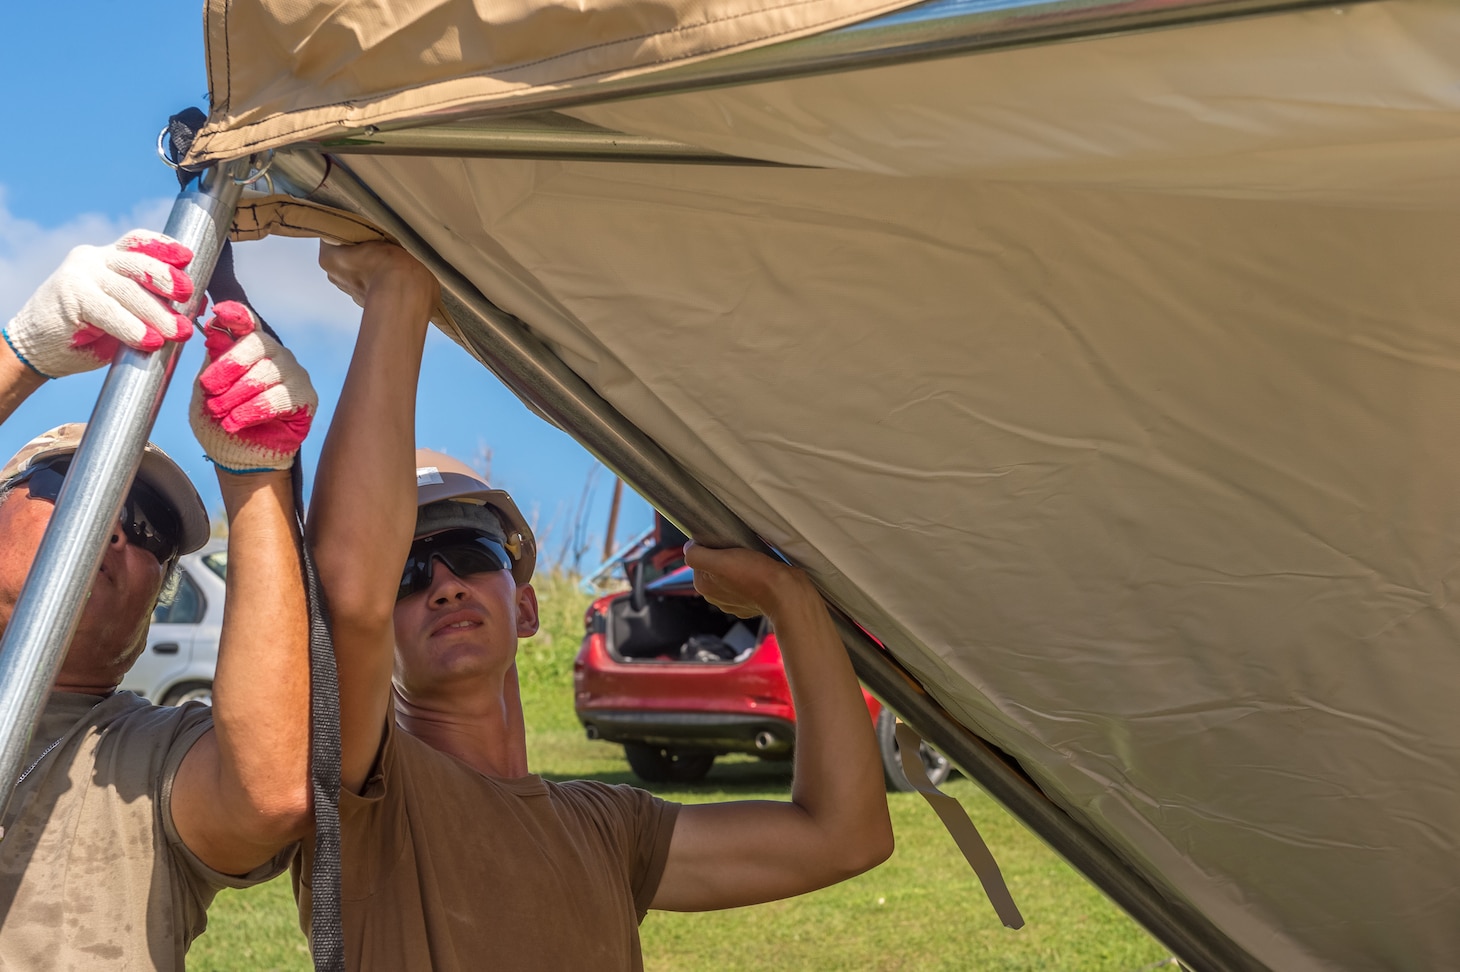 TINIAN, Commonwealth of the Northern Marianas Islands (Nov. 7, 2018) Engineering Aide Constructionman Cameron Tanner, assigned to Naval Mobile Construction Battalion 1, and a Tinian official erect a FEMA-provided tent for a Tinian family whose home was destroyed by Super Typhoon Yutu. Service members from Joint Region Marianas and Indo-Pacific Command are providing Department of Defense support to the Commonwealth of the Northern Mariana Islands' civil and local officials as part of the FEMA-supported Super Typhoon Yutu recovery efforts.